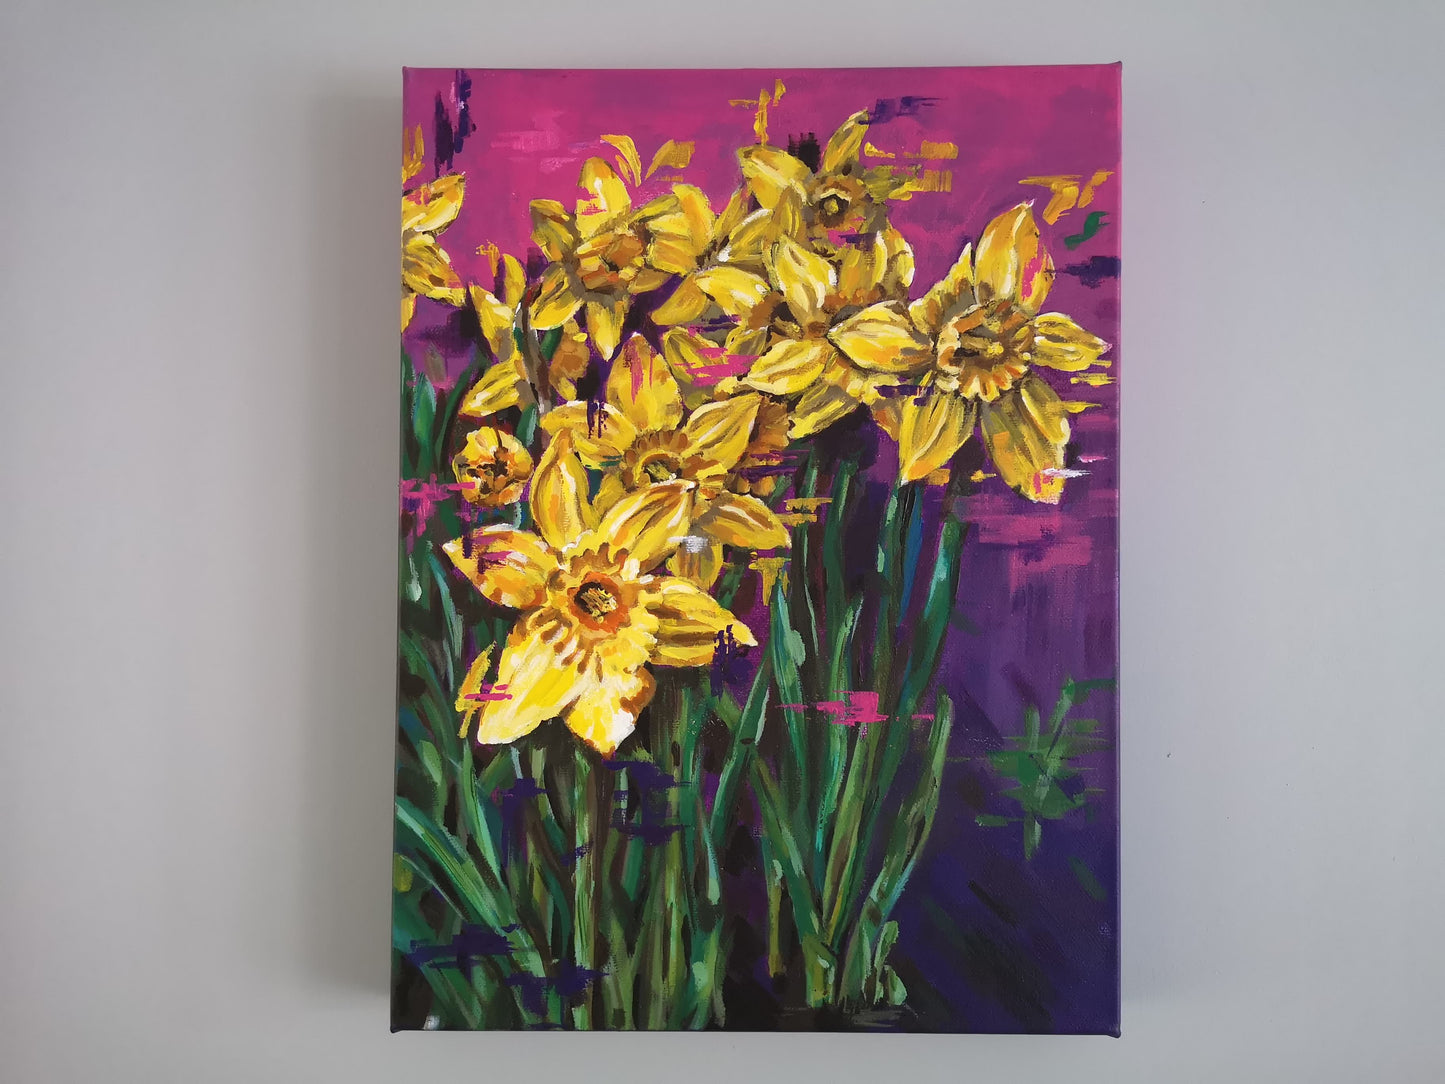 Contemporary vibrant daffodil painting by Judy Century Art. Semi Abstract painting featuring colourful yellow, purples and pinks. Canvas painting hanging on grey wall